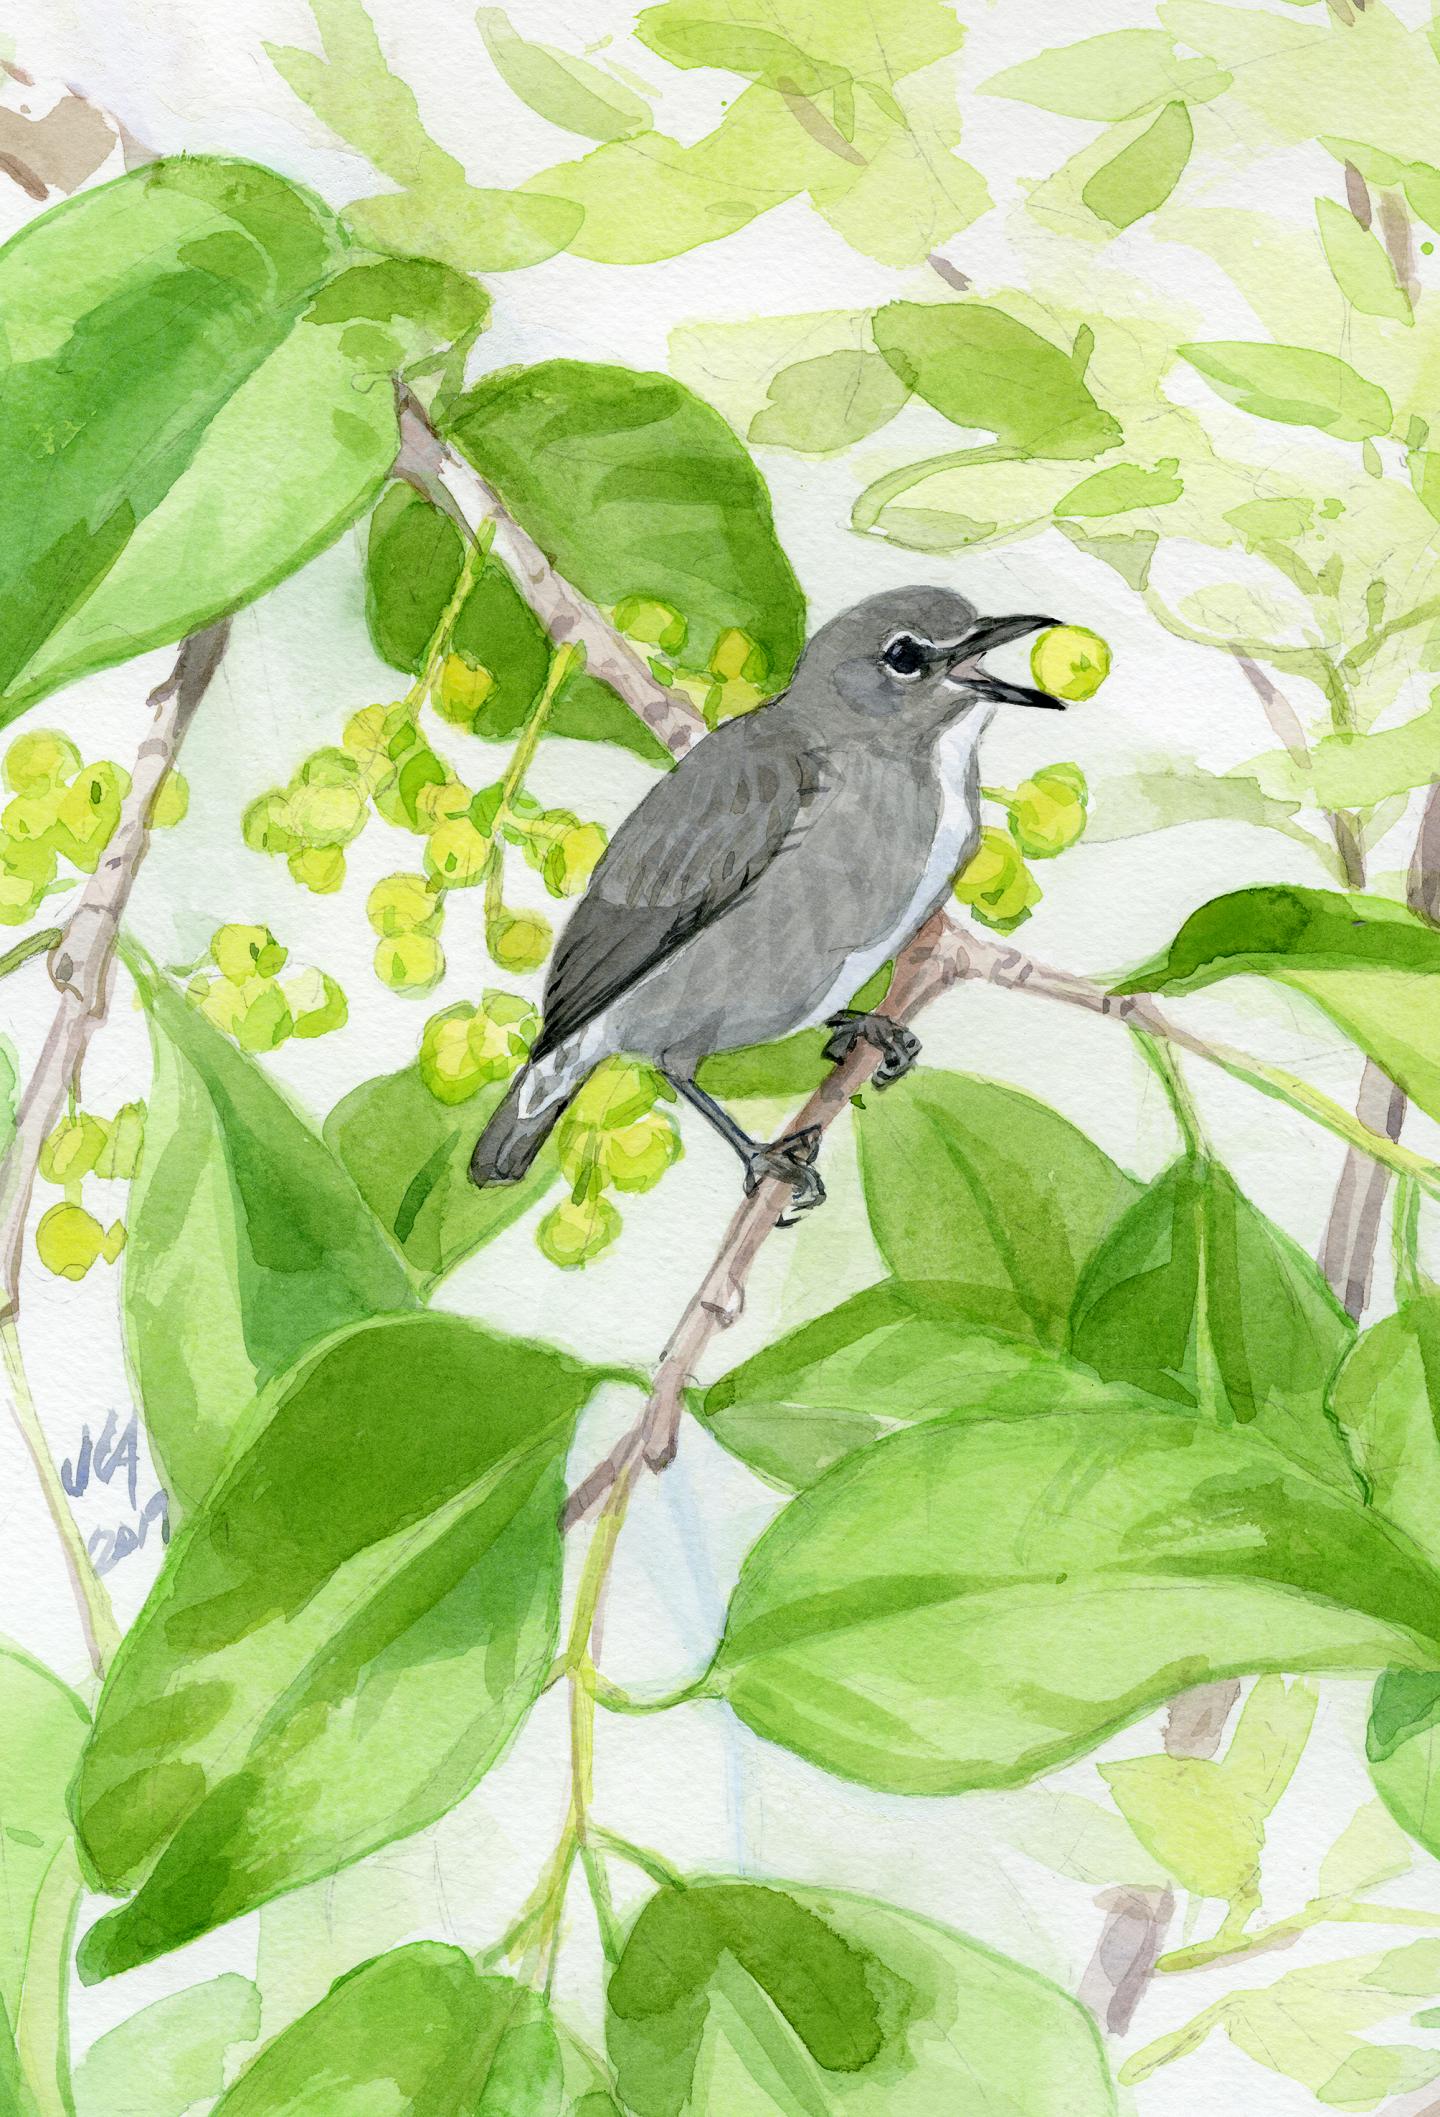 Scientific Illustration of the Spectacled Flowerpecker